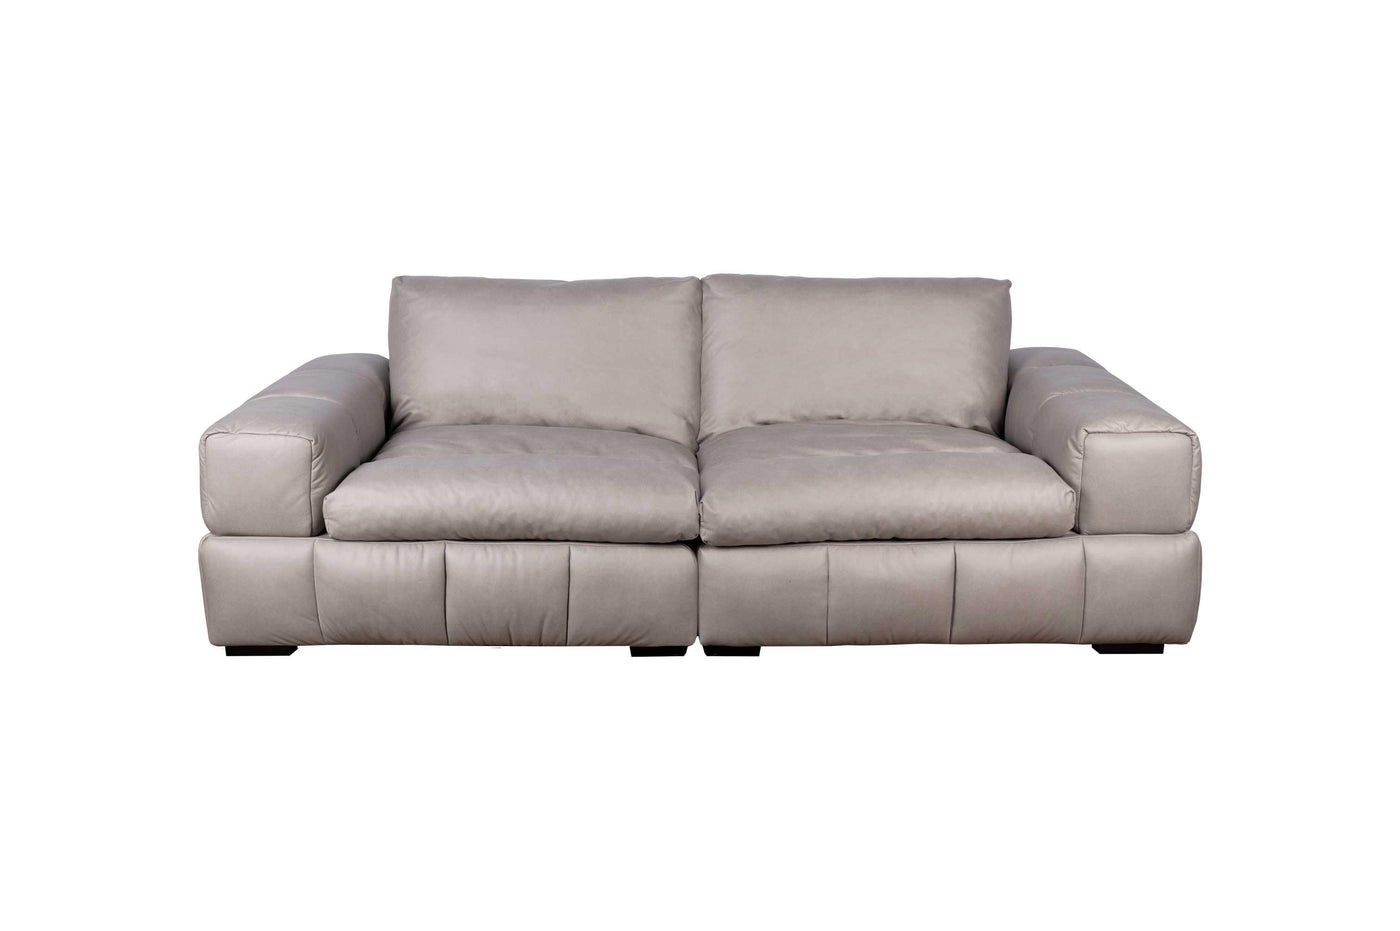 Vivian 2 Seater Sofa Hoya Casa Hoyacasa.ca couch sofa bed 4 seater sectional table kitchen table love seat sofa bed matress Toronto Canada manufactures home decoration frames indoor Ottoman sale